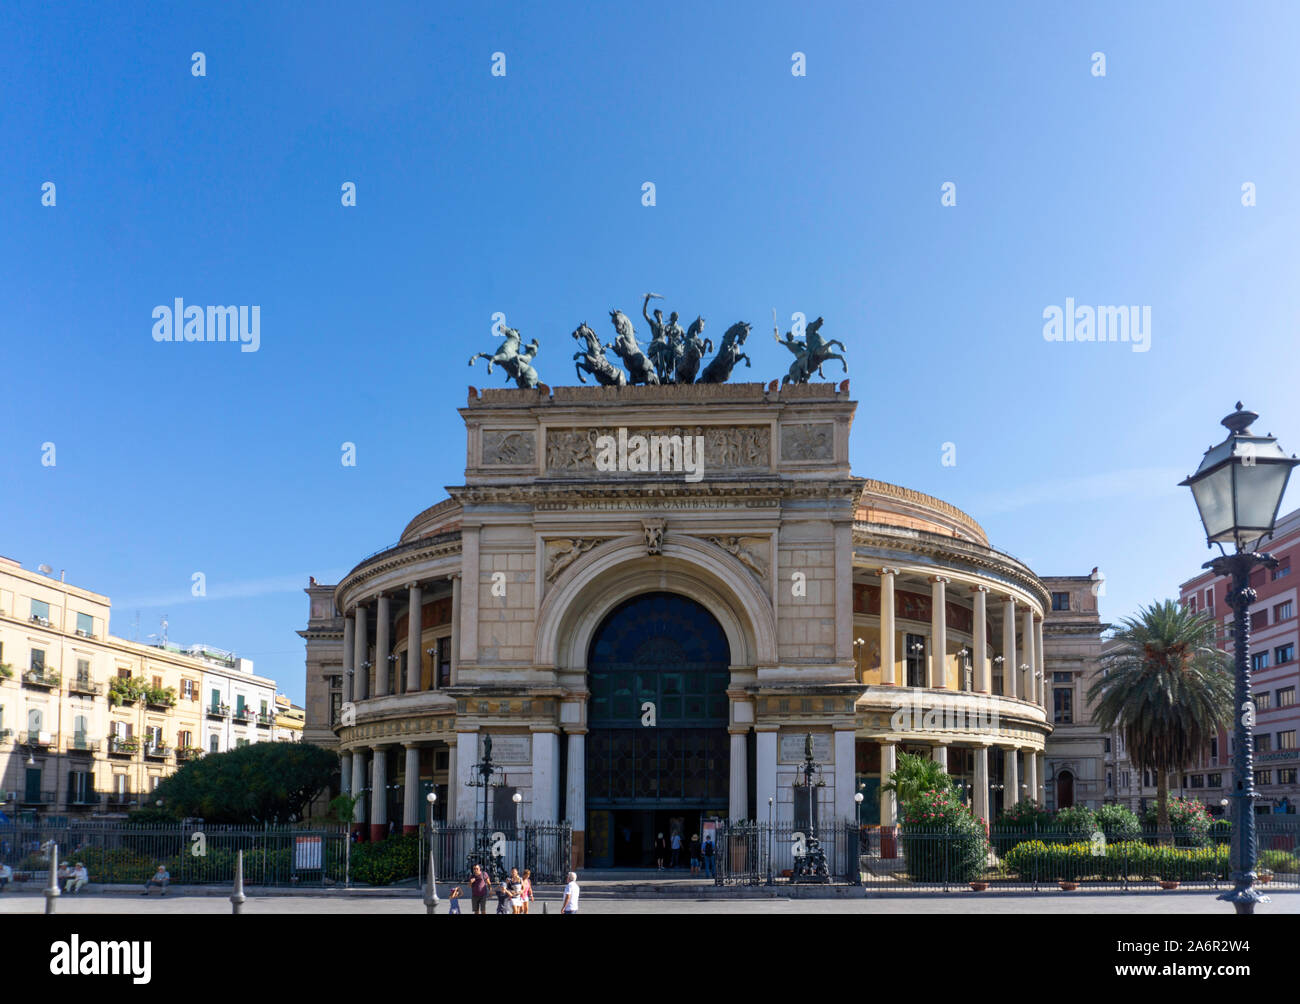 The Teatro Politeama, Garibaldi, it is the home of  Orchestra Sinfonica Siciliana.completed in 1891. Stock Photo